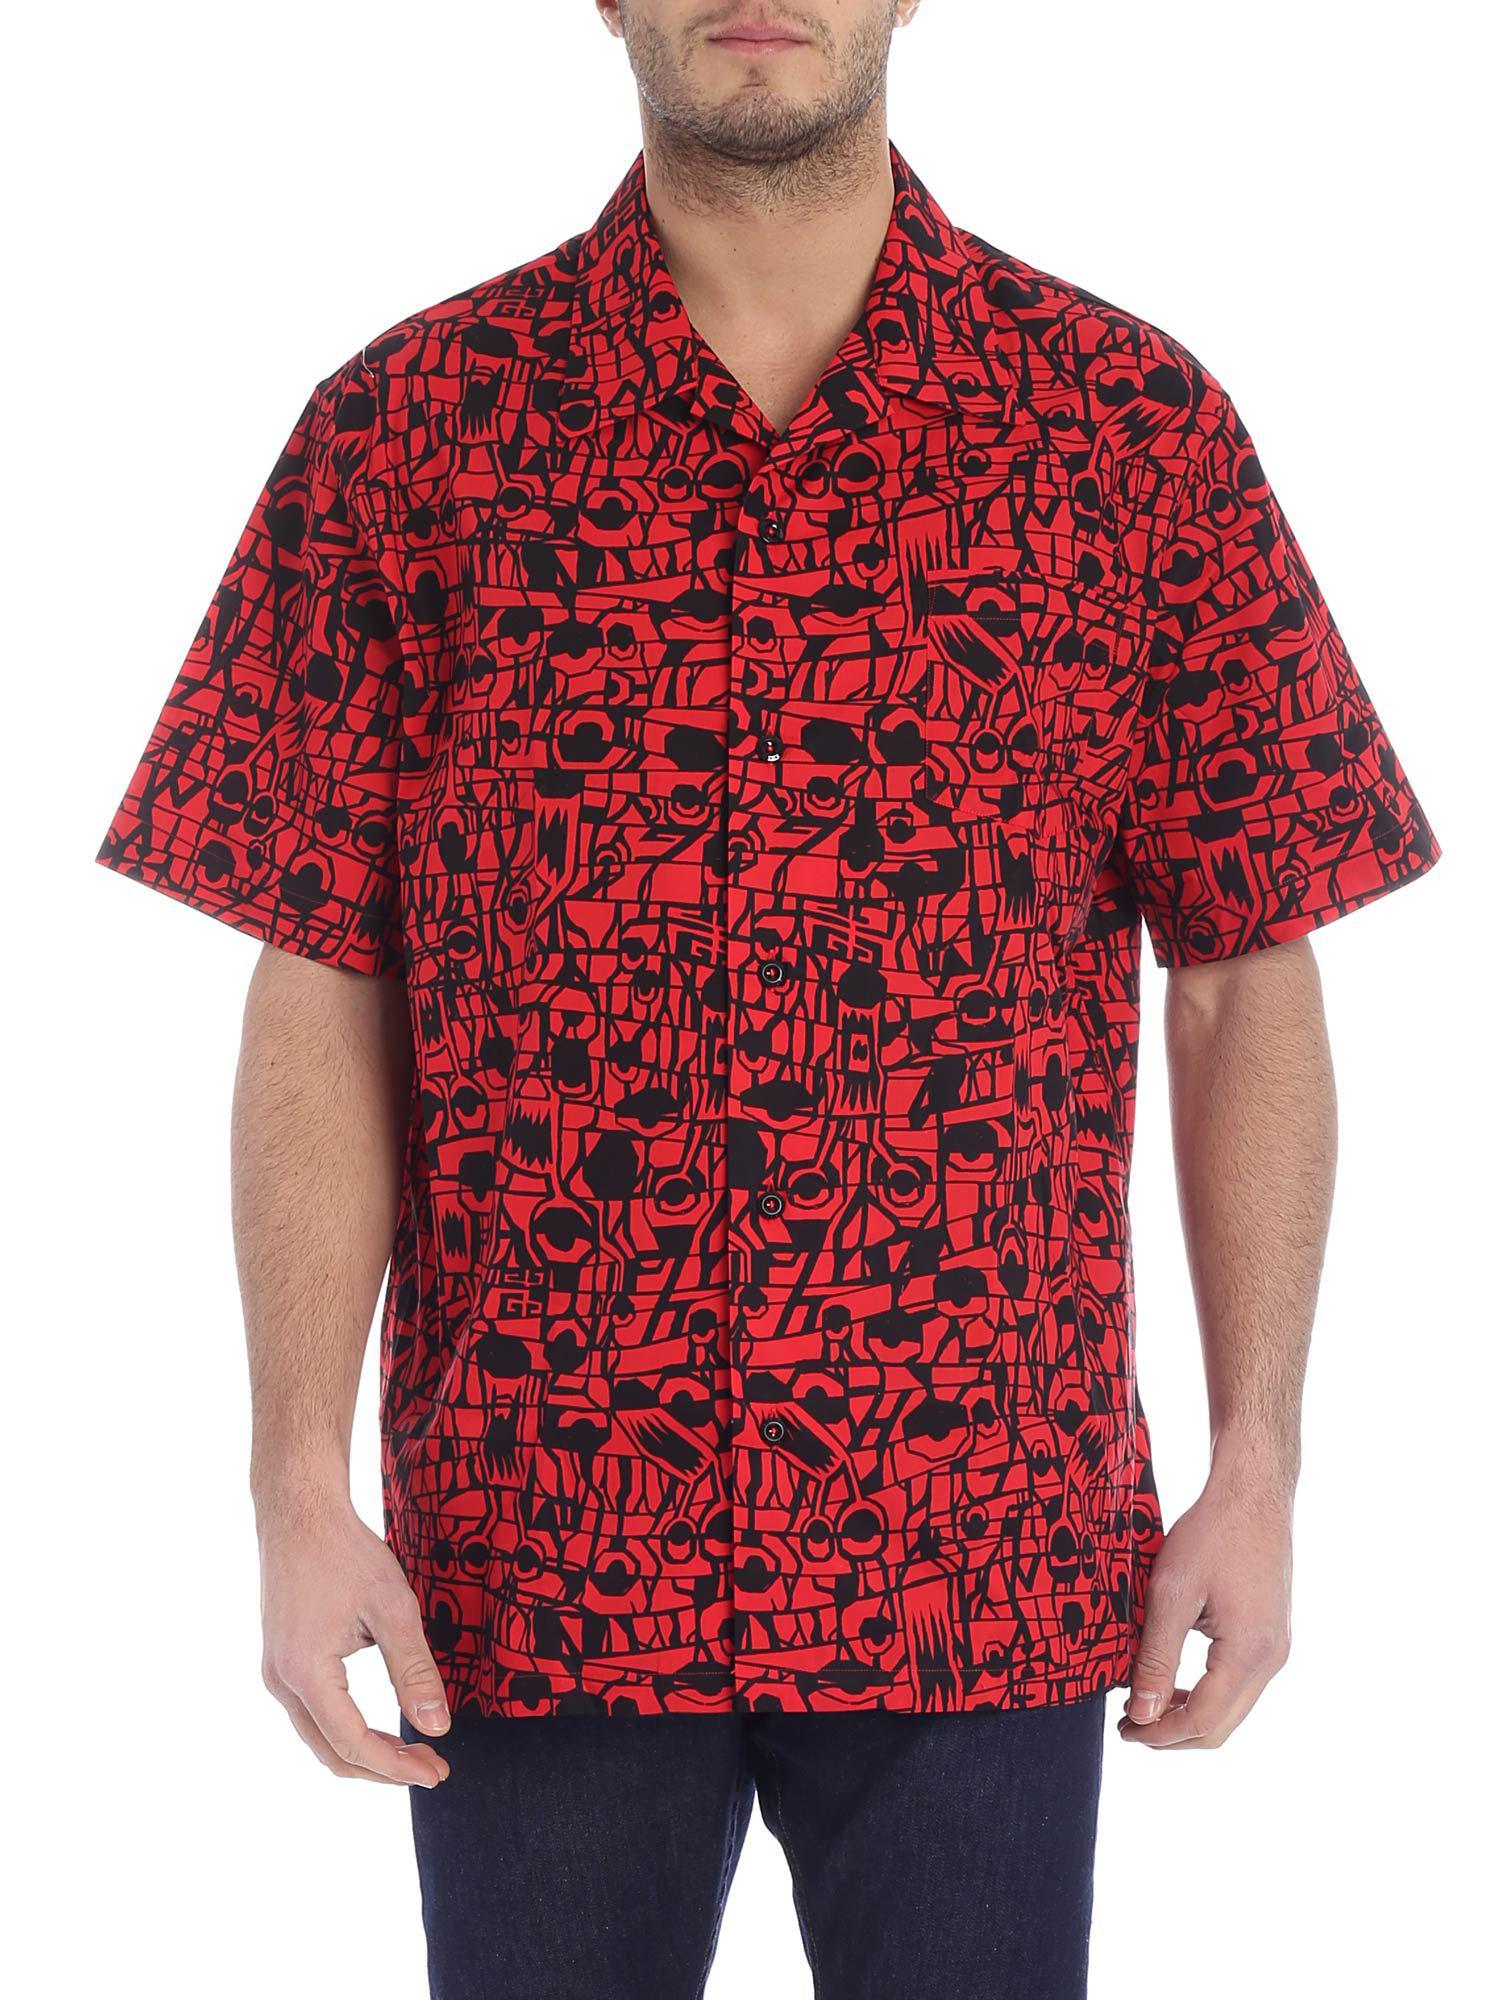 Lyst - Givenchy Printed Red Overfit Shirt in Red for Men - Save 18. ...